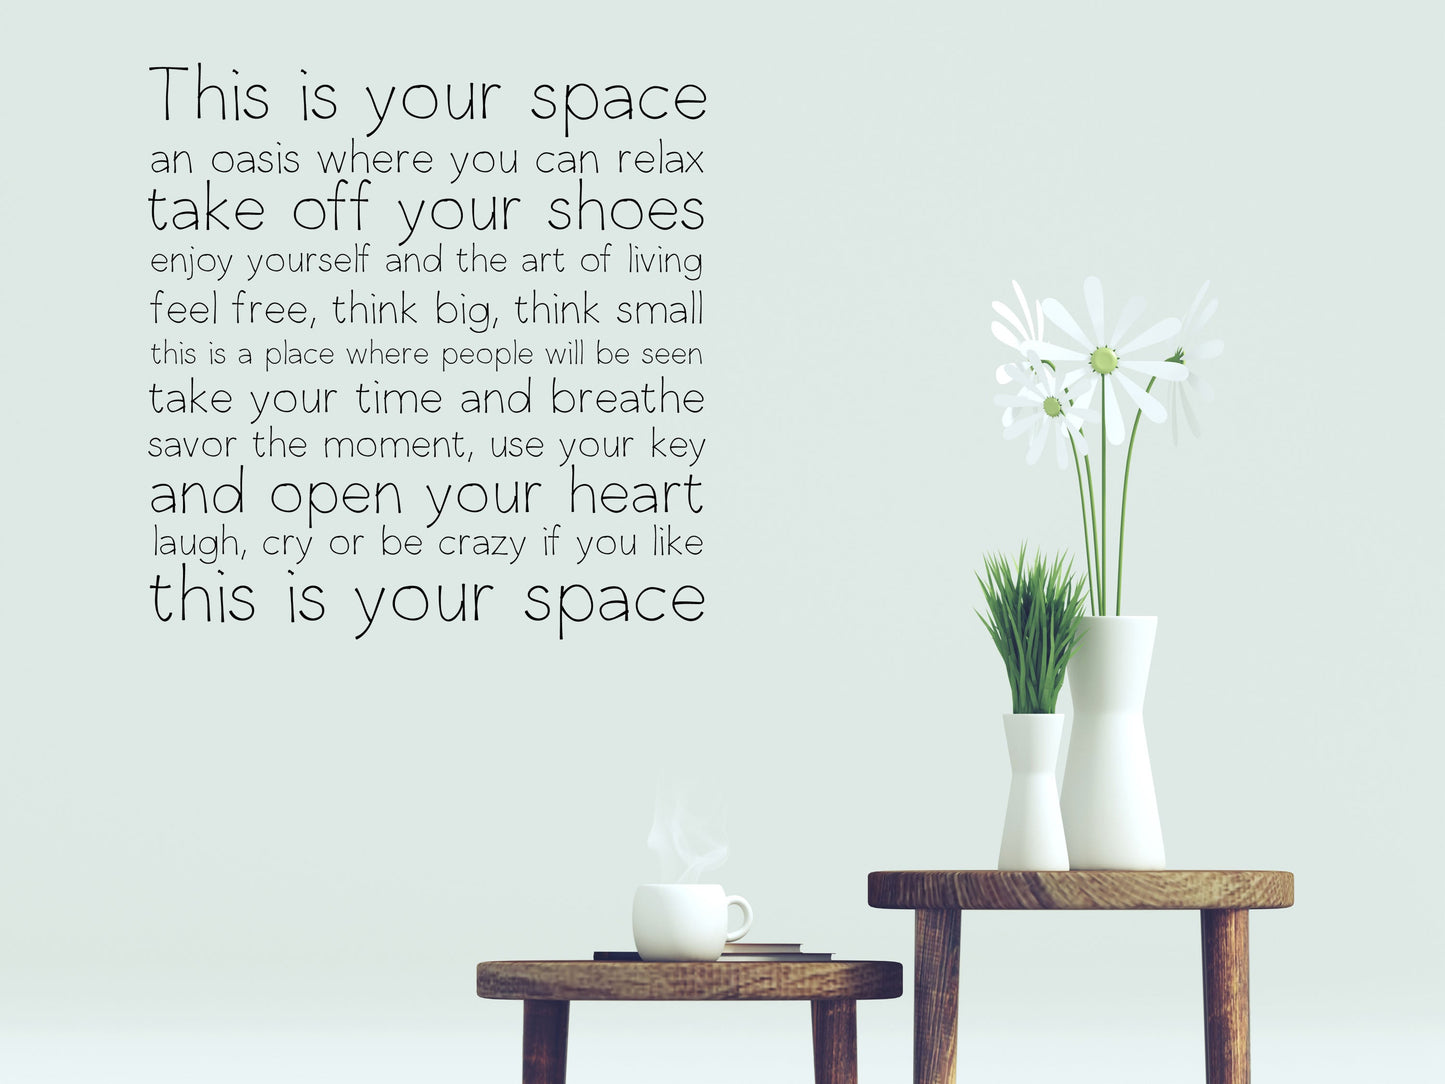 This Is Your Space - Inspirational Wall Signs Vinyl Wall Decal Inspirational Wall Signs 